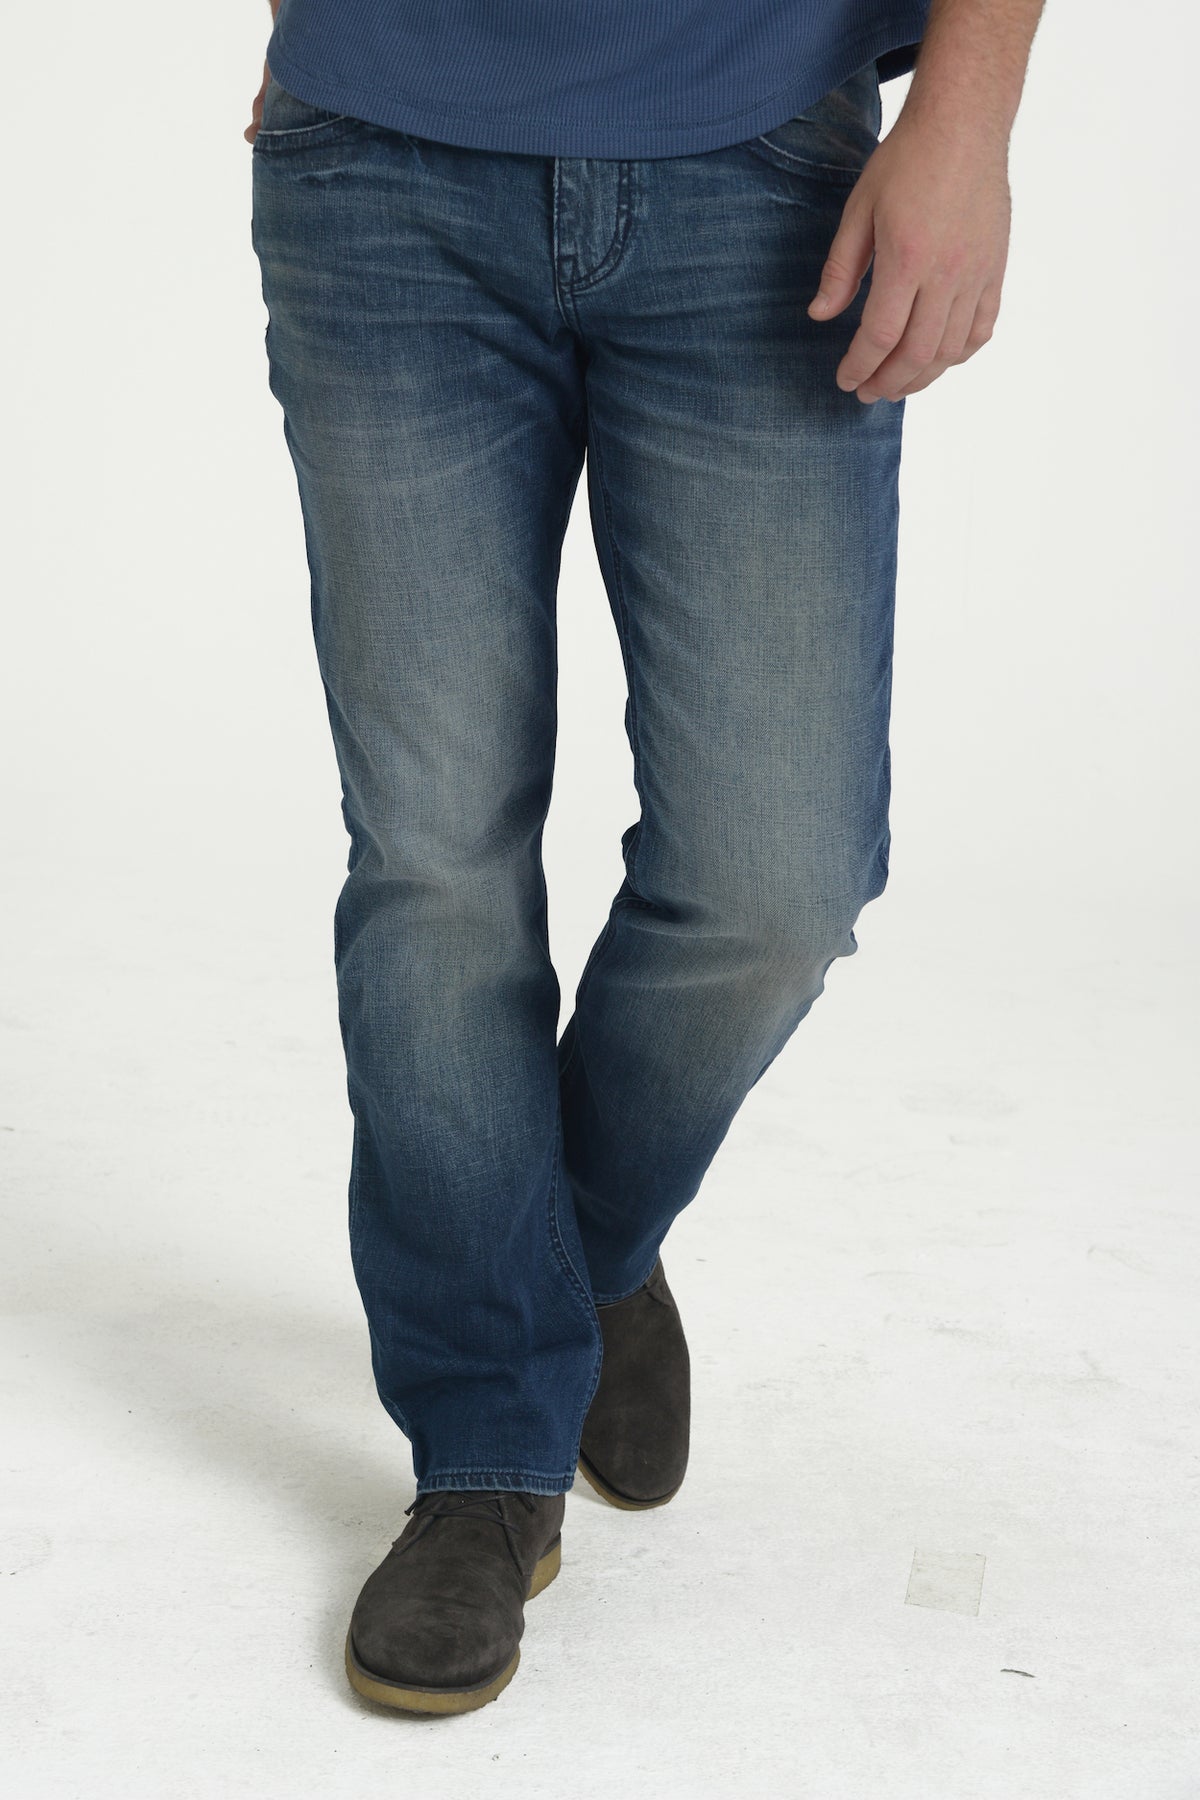 TEXAS STRAIGHT DENIM PANTS IN WASTED BLUES